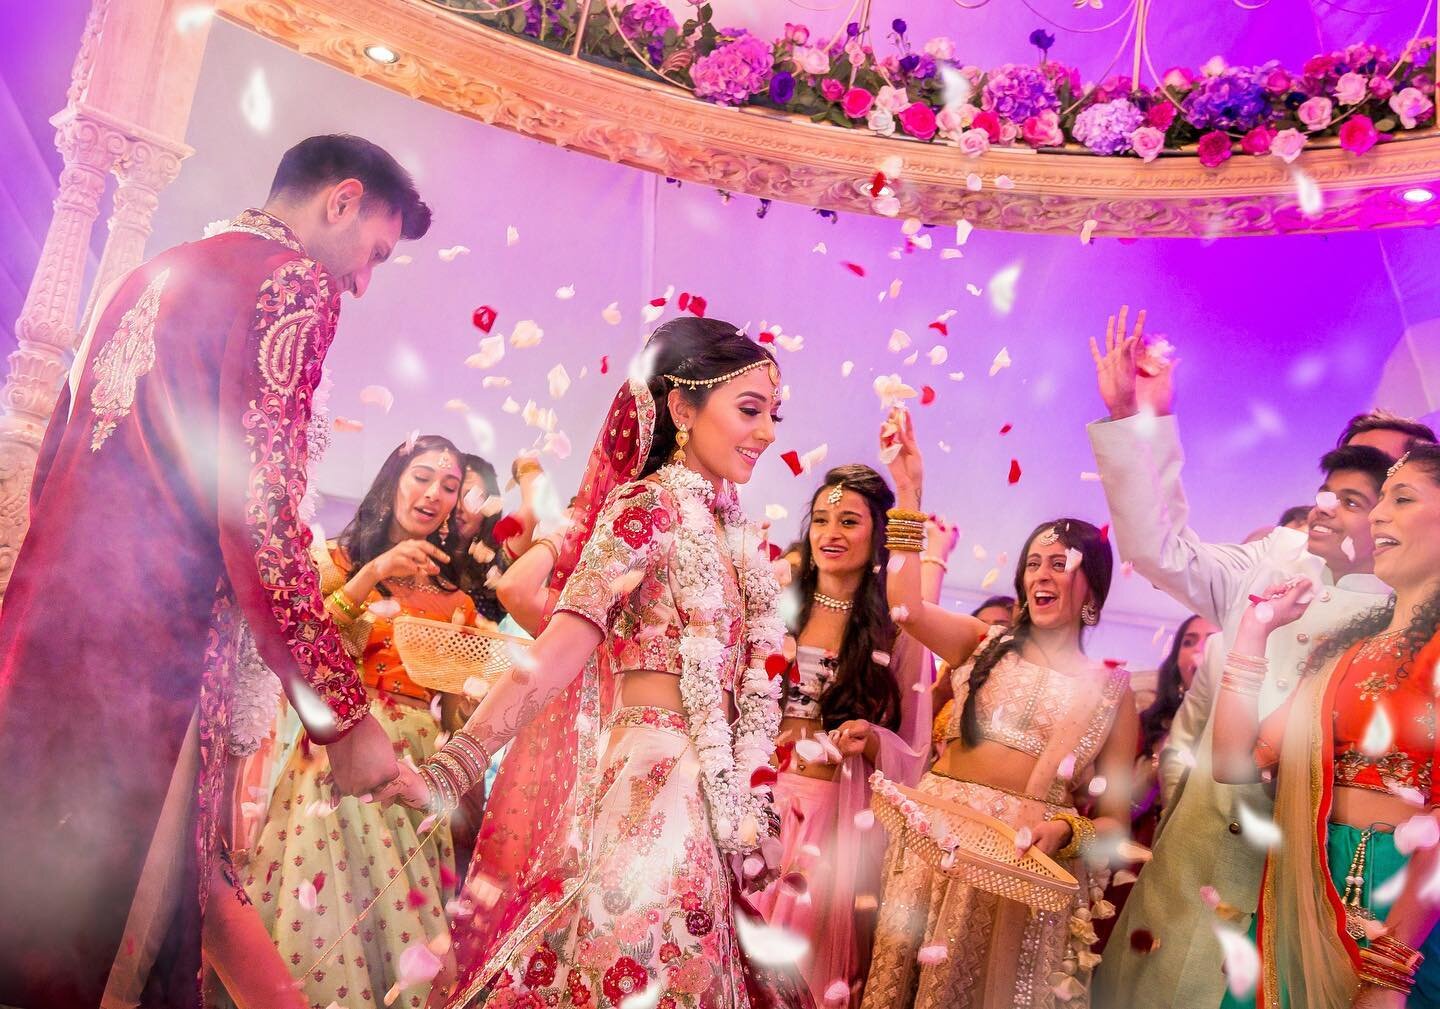 A few frames from the wedding of  Rohini and Hanish. An absolute pleasure  to document their colorful and vibrant celebrations. Working yet again with some of the best wedding suppliers in the UK. .
.
.
.
.
.
#asianweddingphotographers #realmoments #